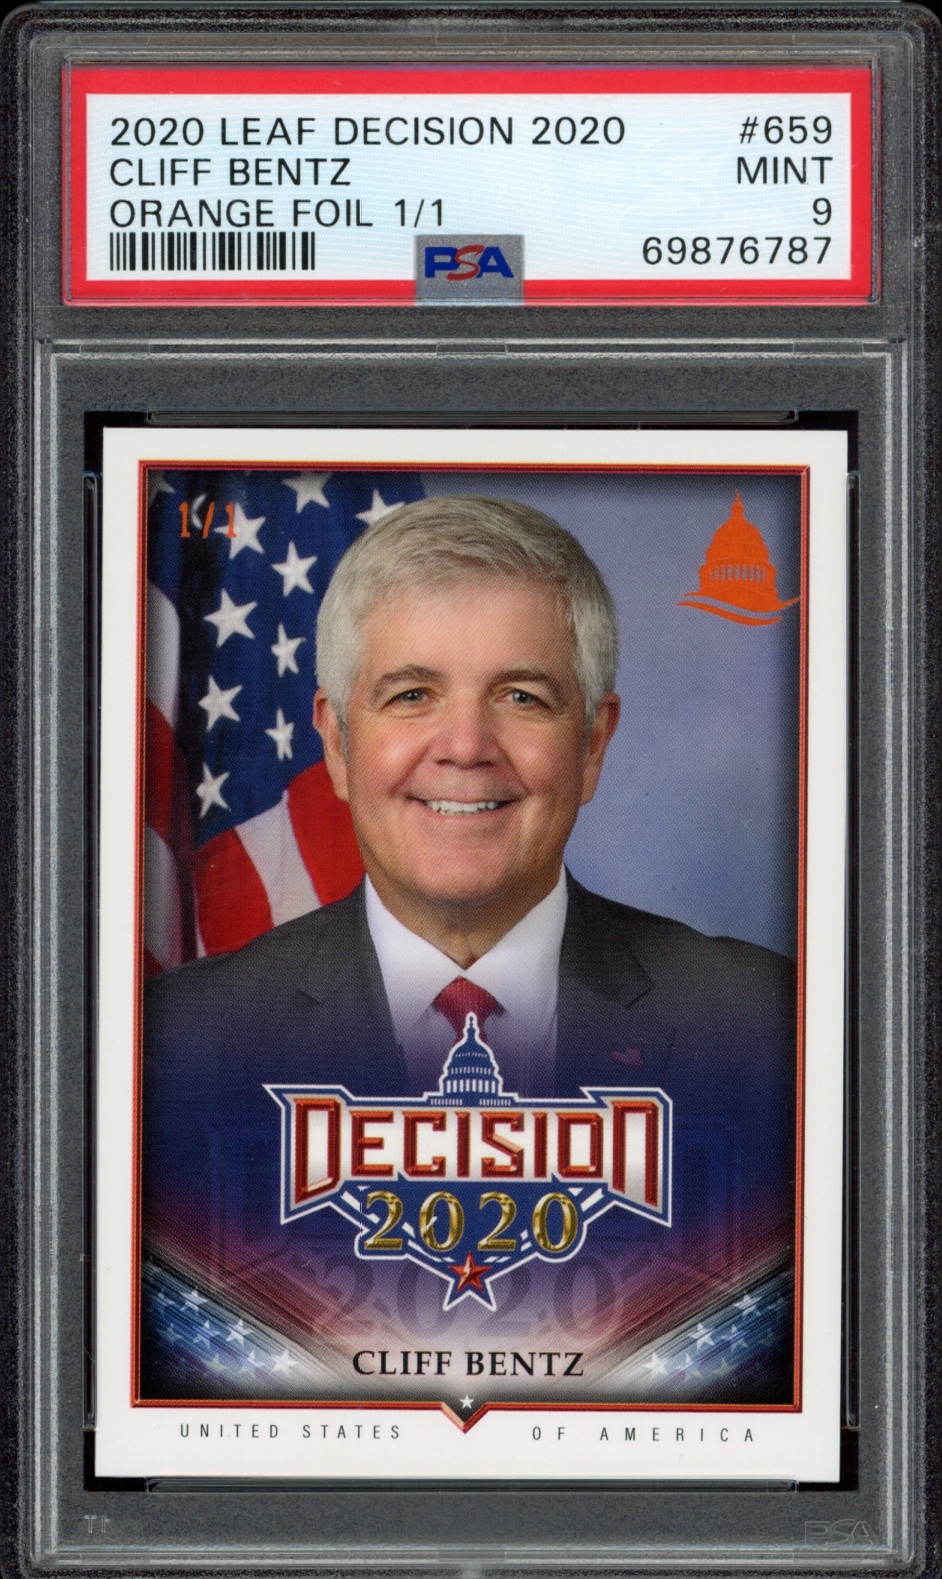 2020 Leaf Decision trading card featuring Cliff Bentz, rated MINT 9 by PSA.